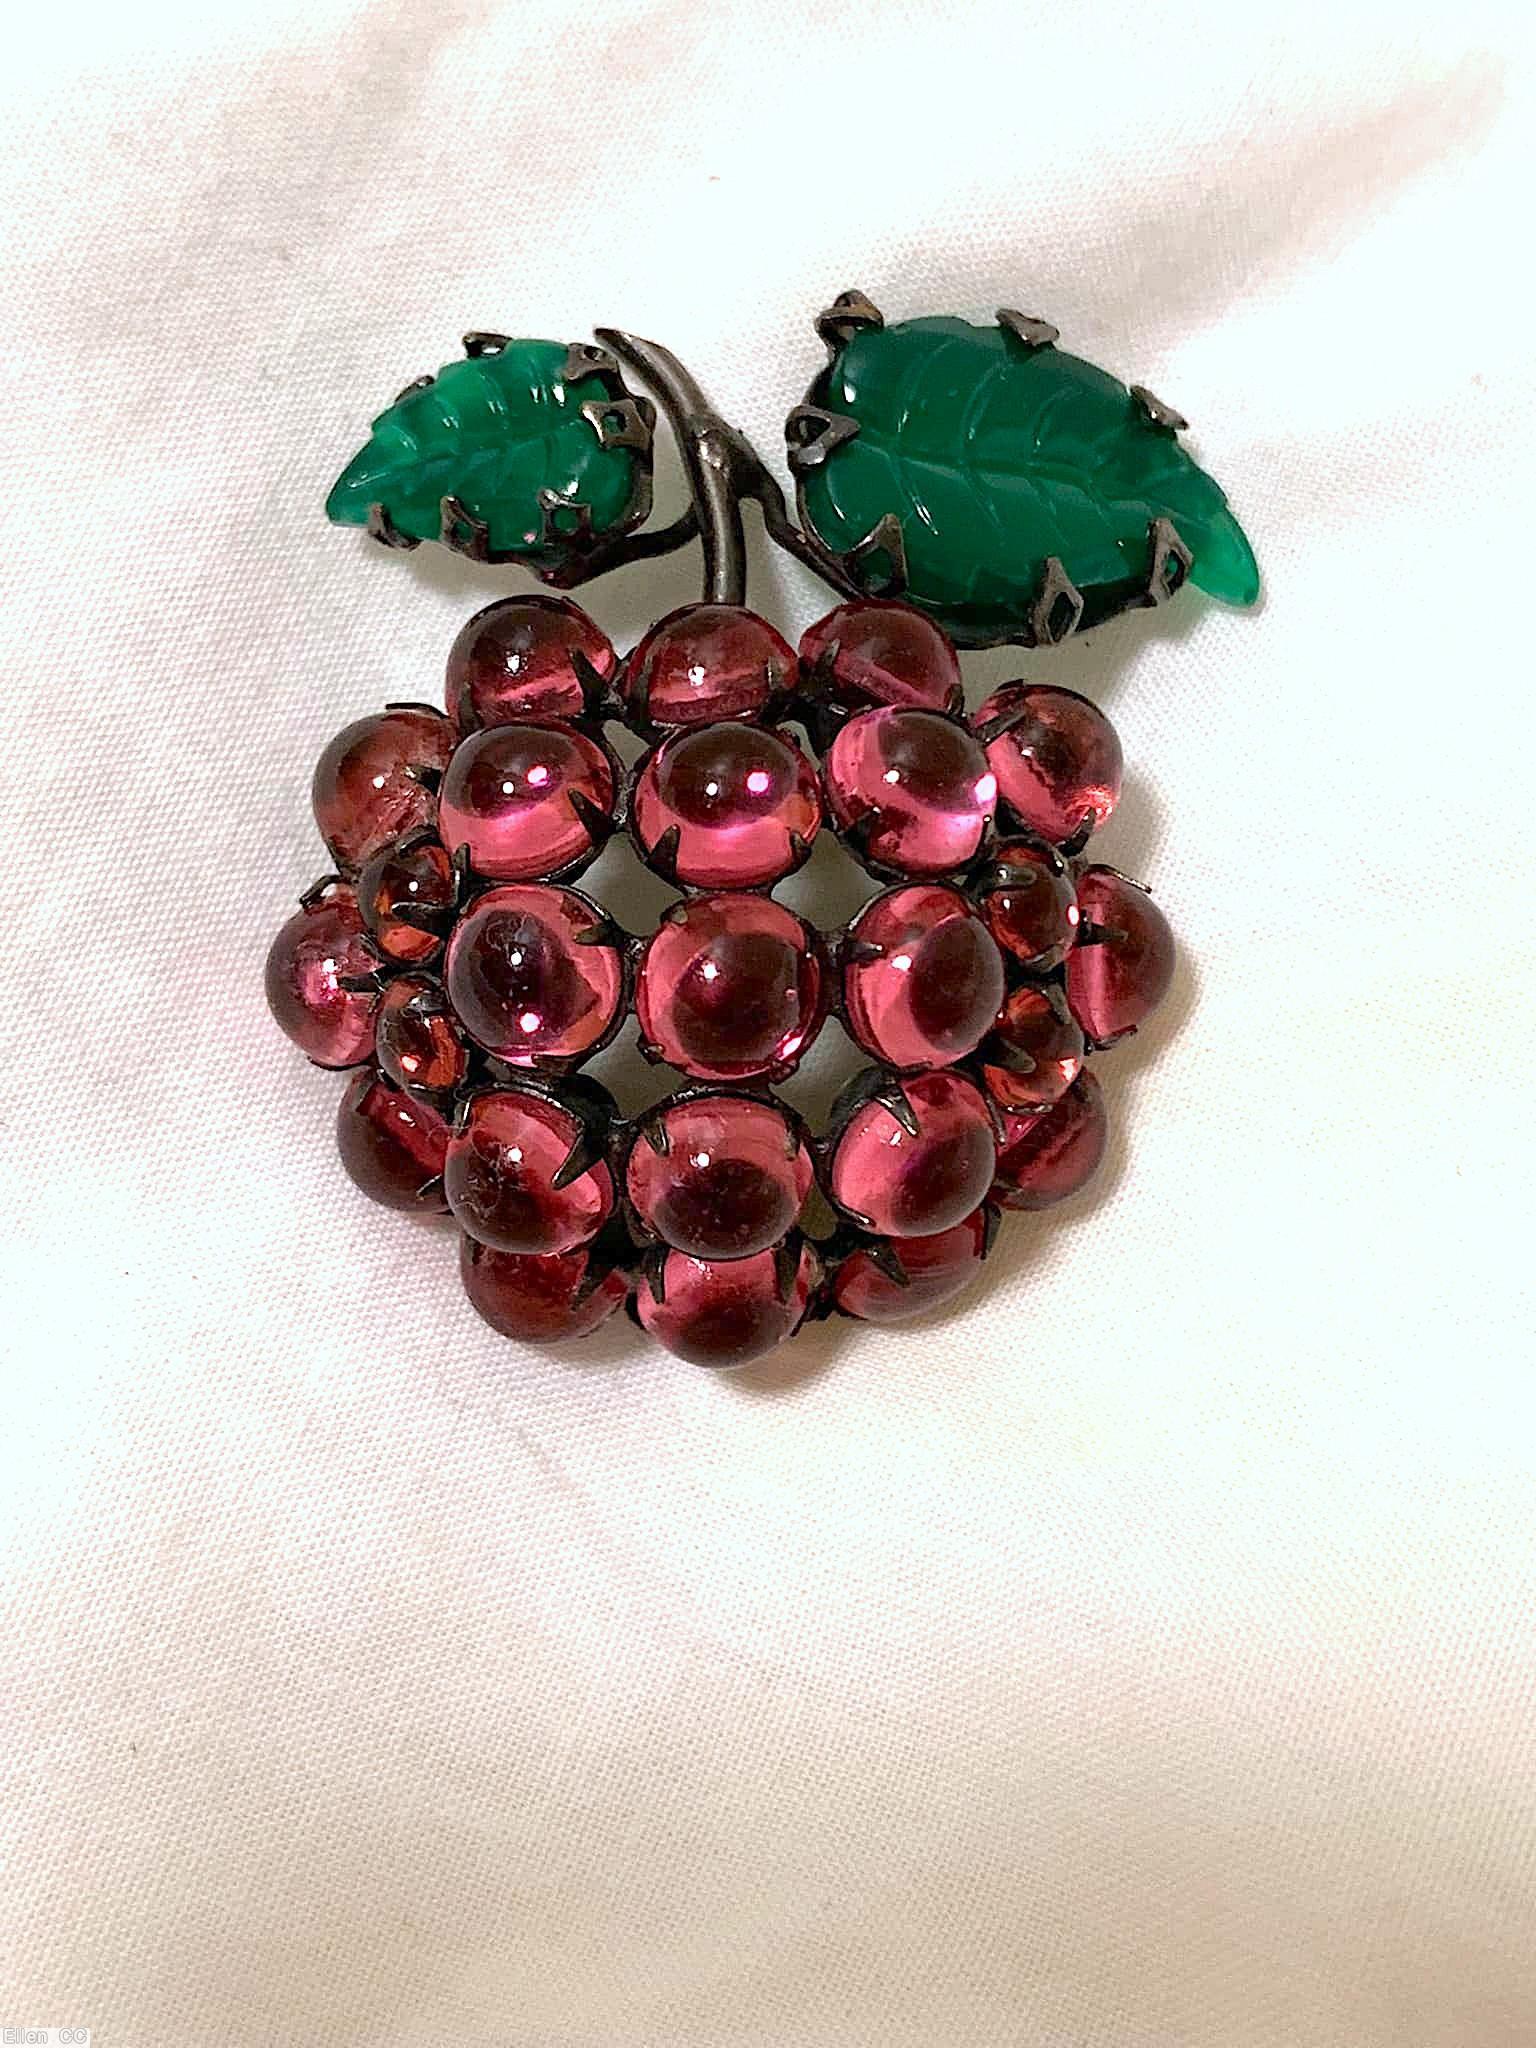 Schreiner 2 carved leaf domed clustered ball berry pin 1 large leaf 1 small leaf short hammered stem clear raspberry small round cab green carved leaf jewelry